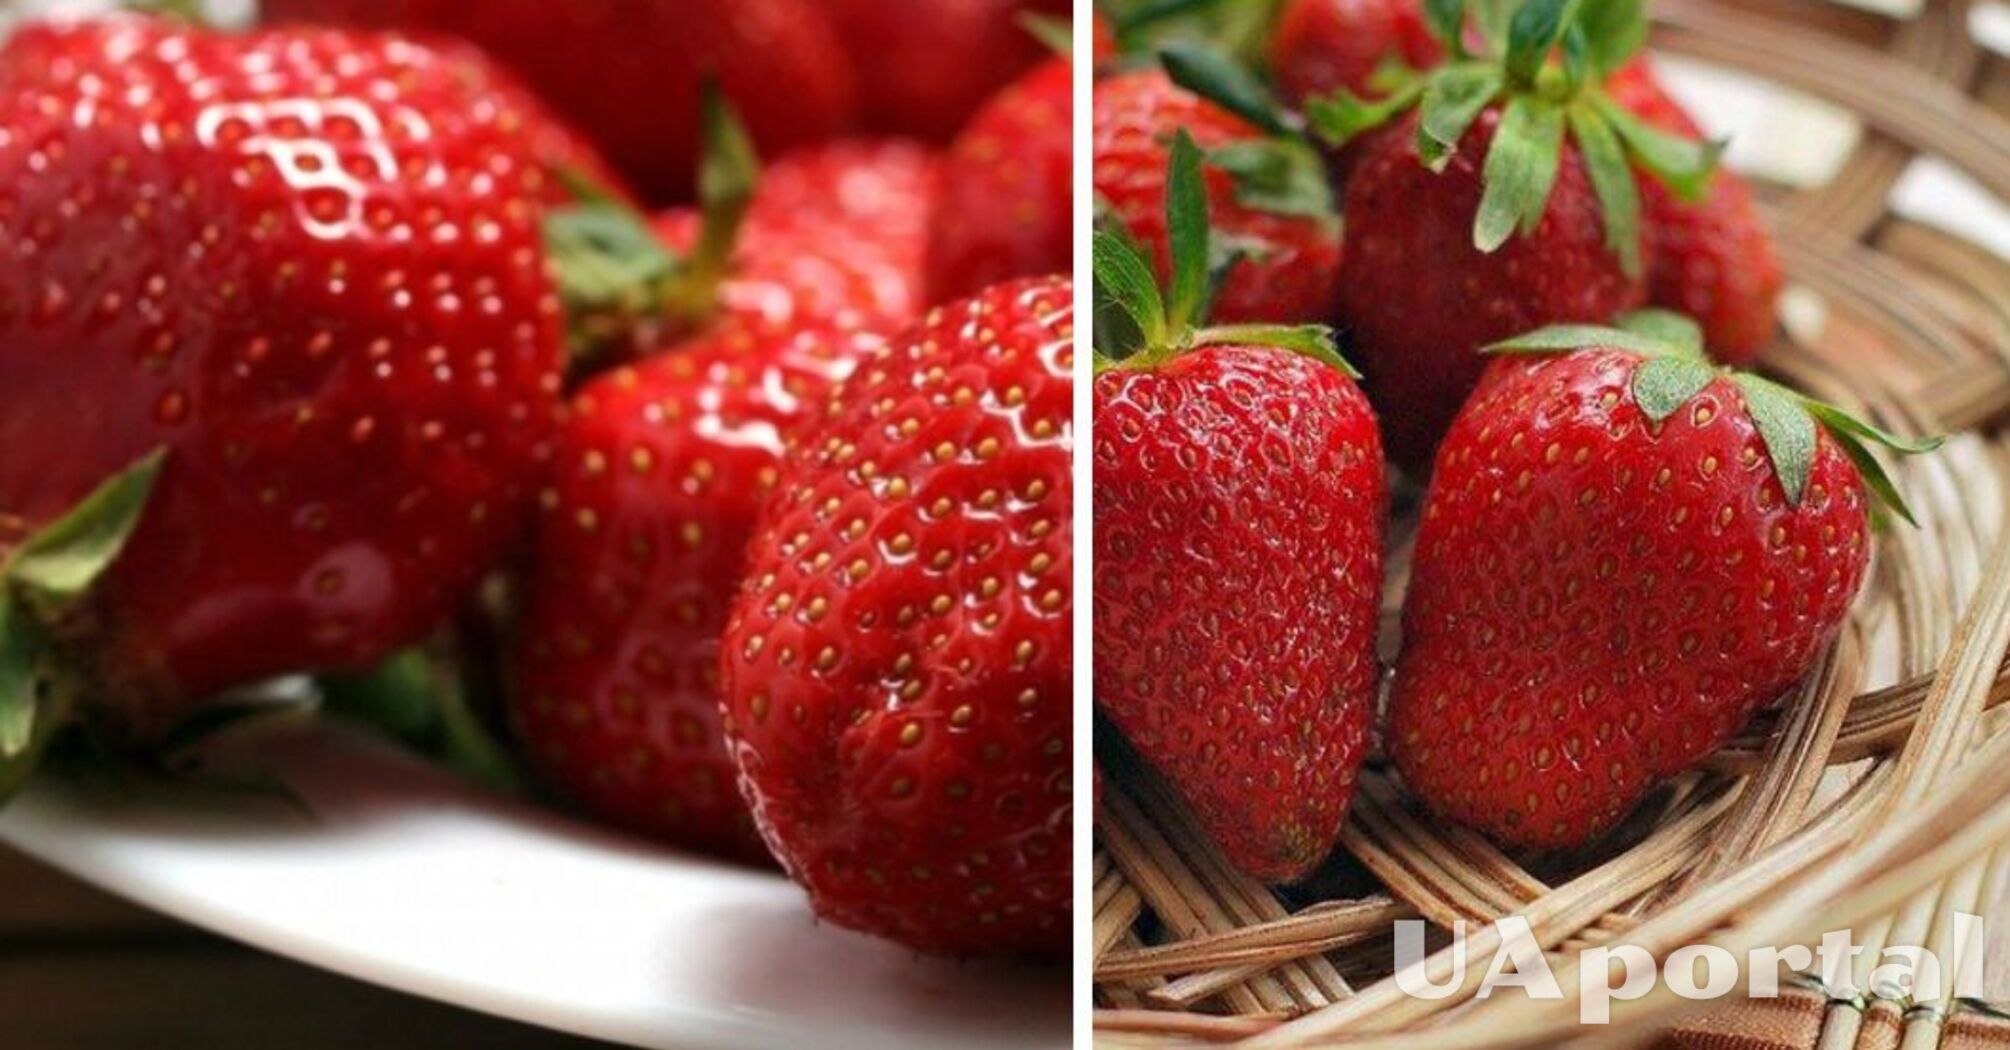 How to clean strawberries to avoid hepatitis A?